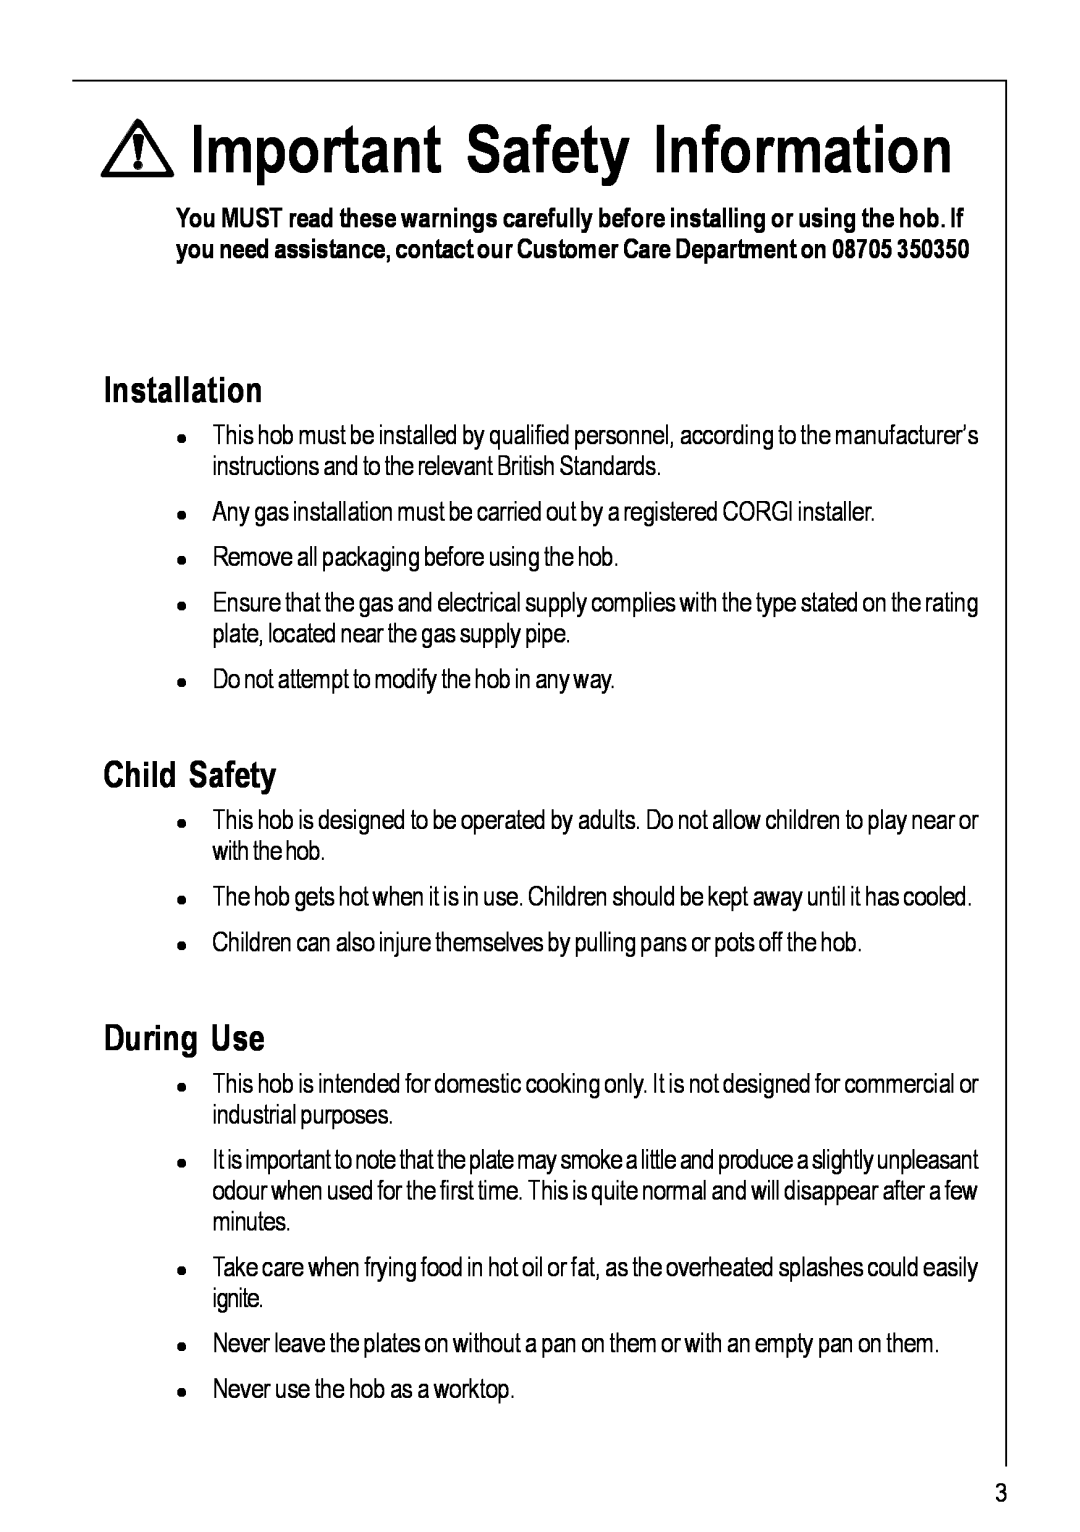 Electrolux 116 K operating instructions Installation, Child Safety, During Use, Important Safety Information 